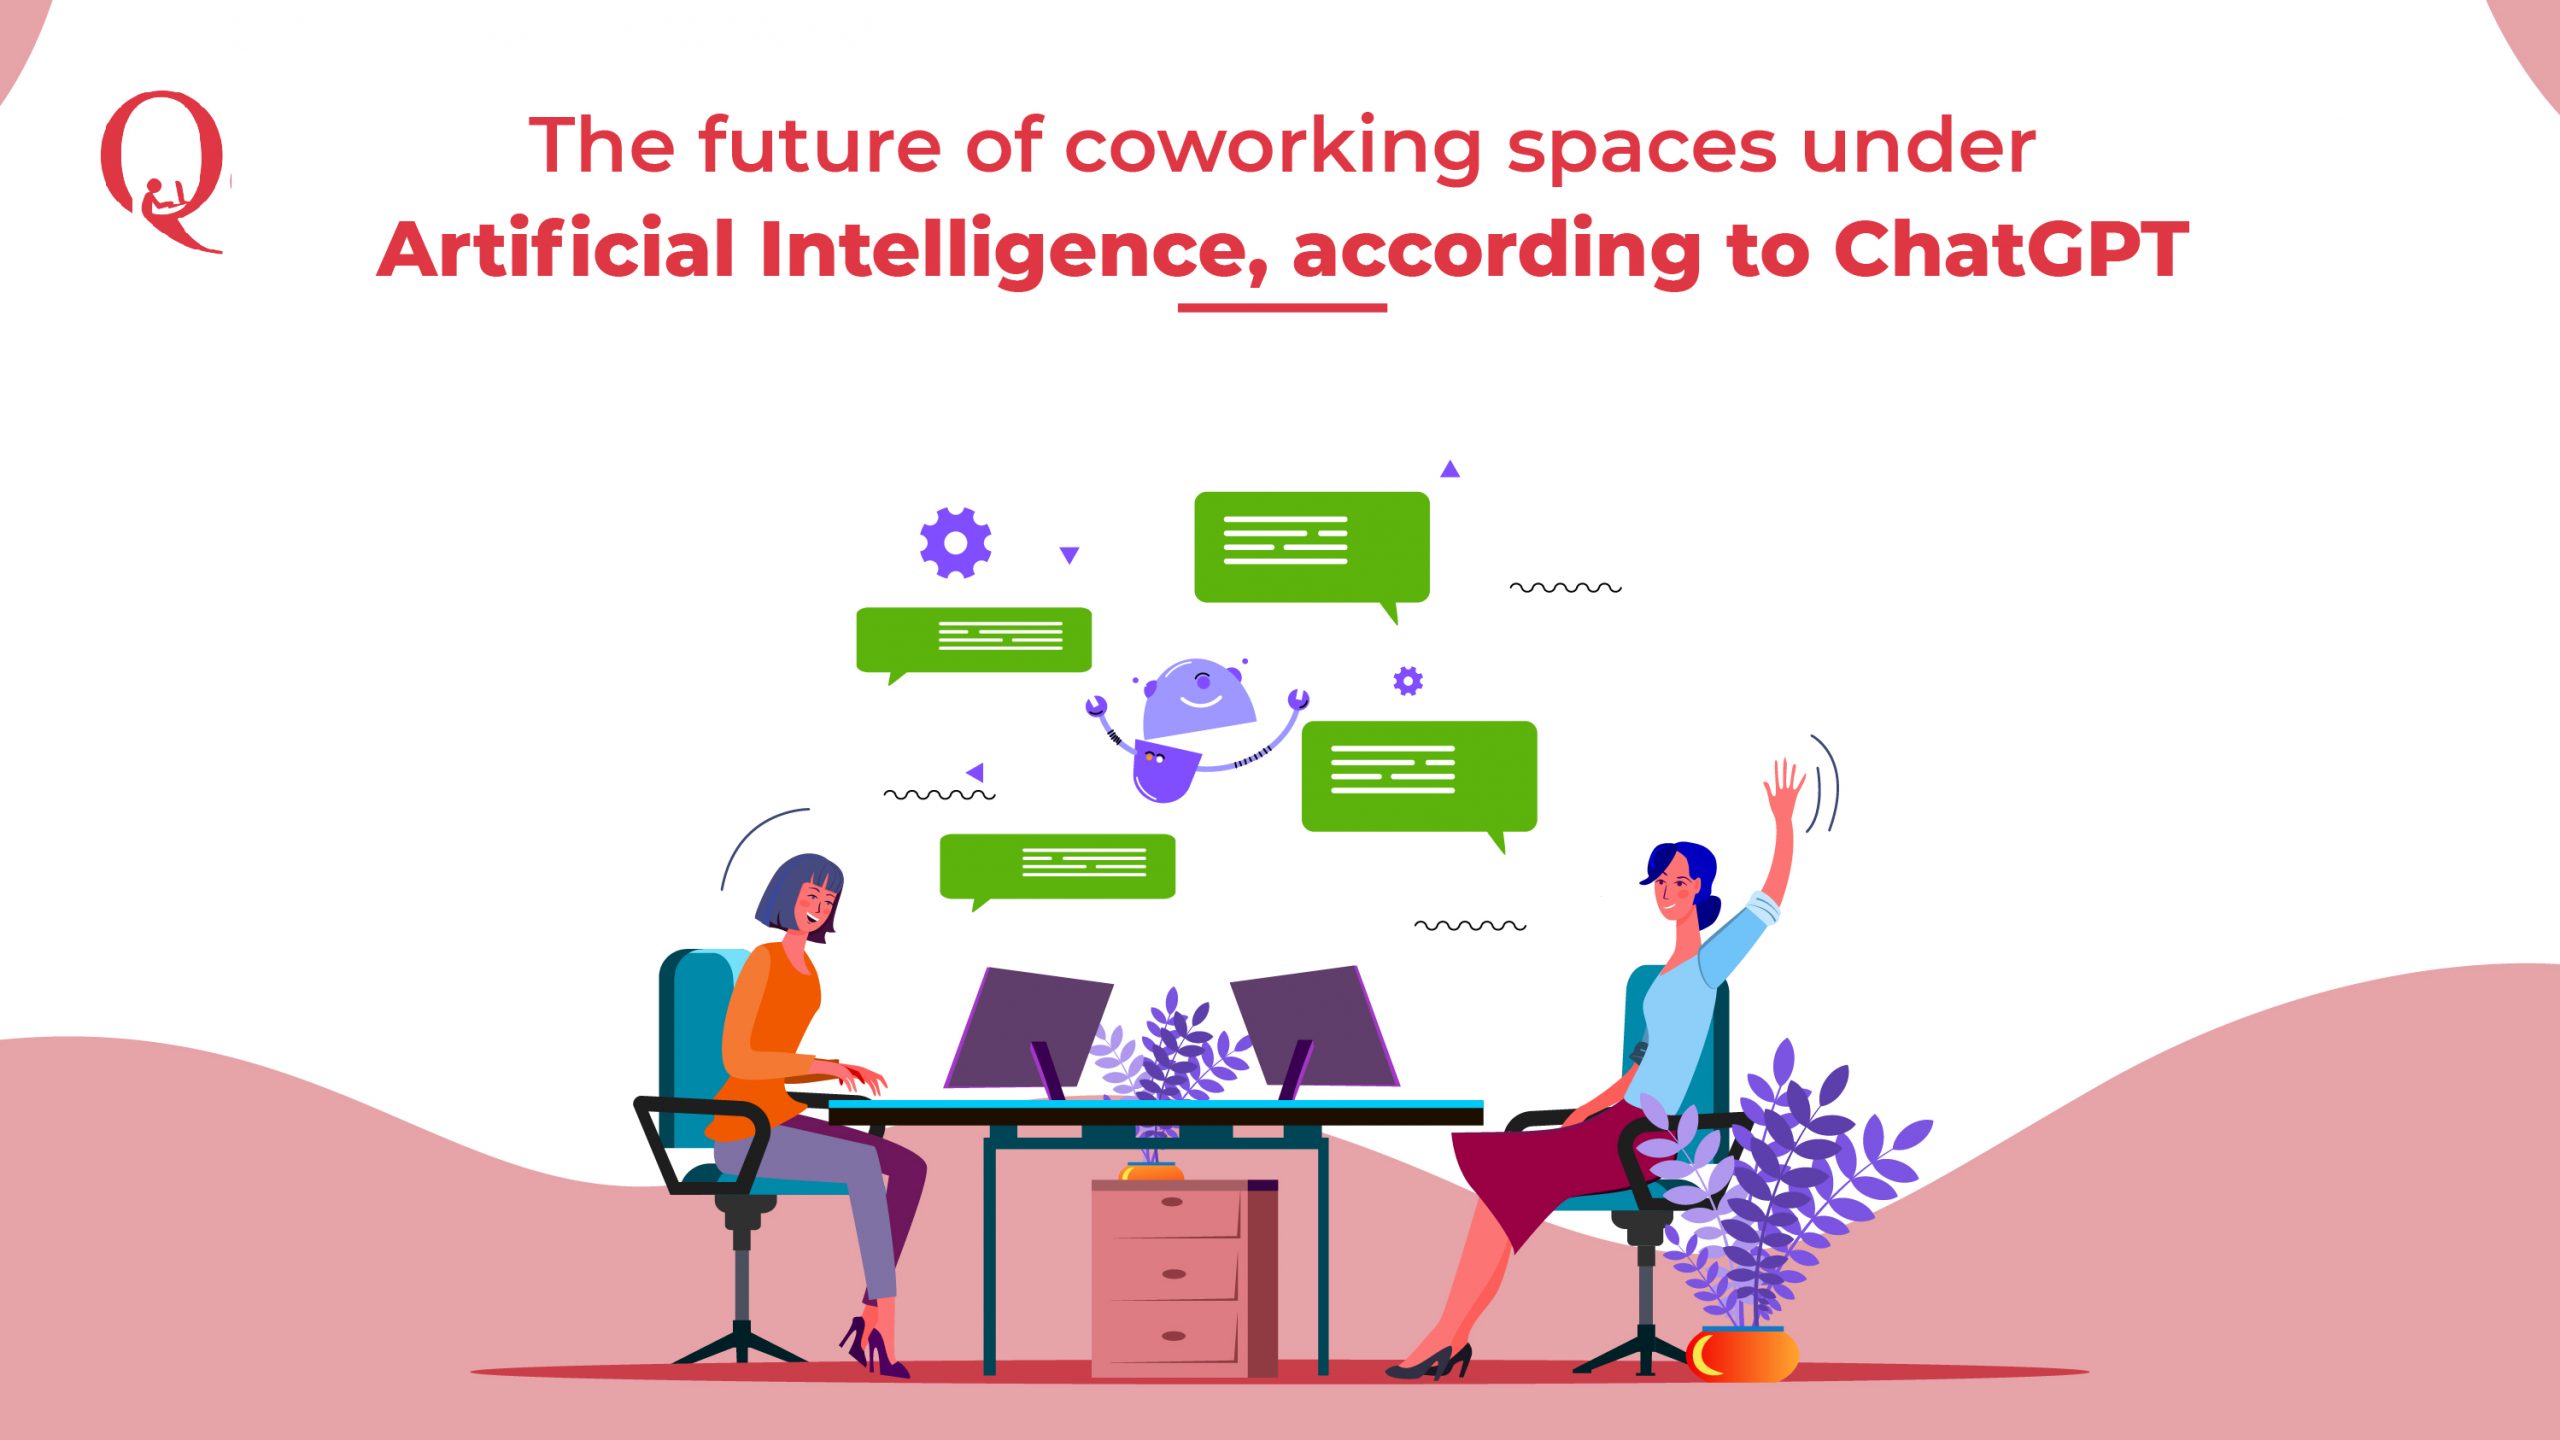 The future of coworking spaces under Artificial Intelligence, according to ChatGPT